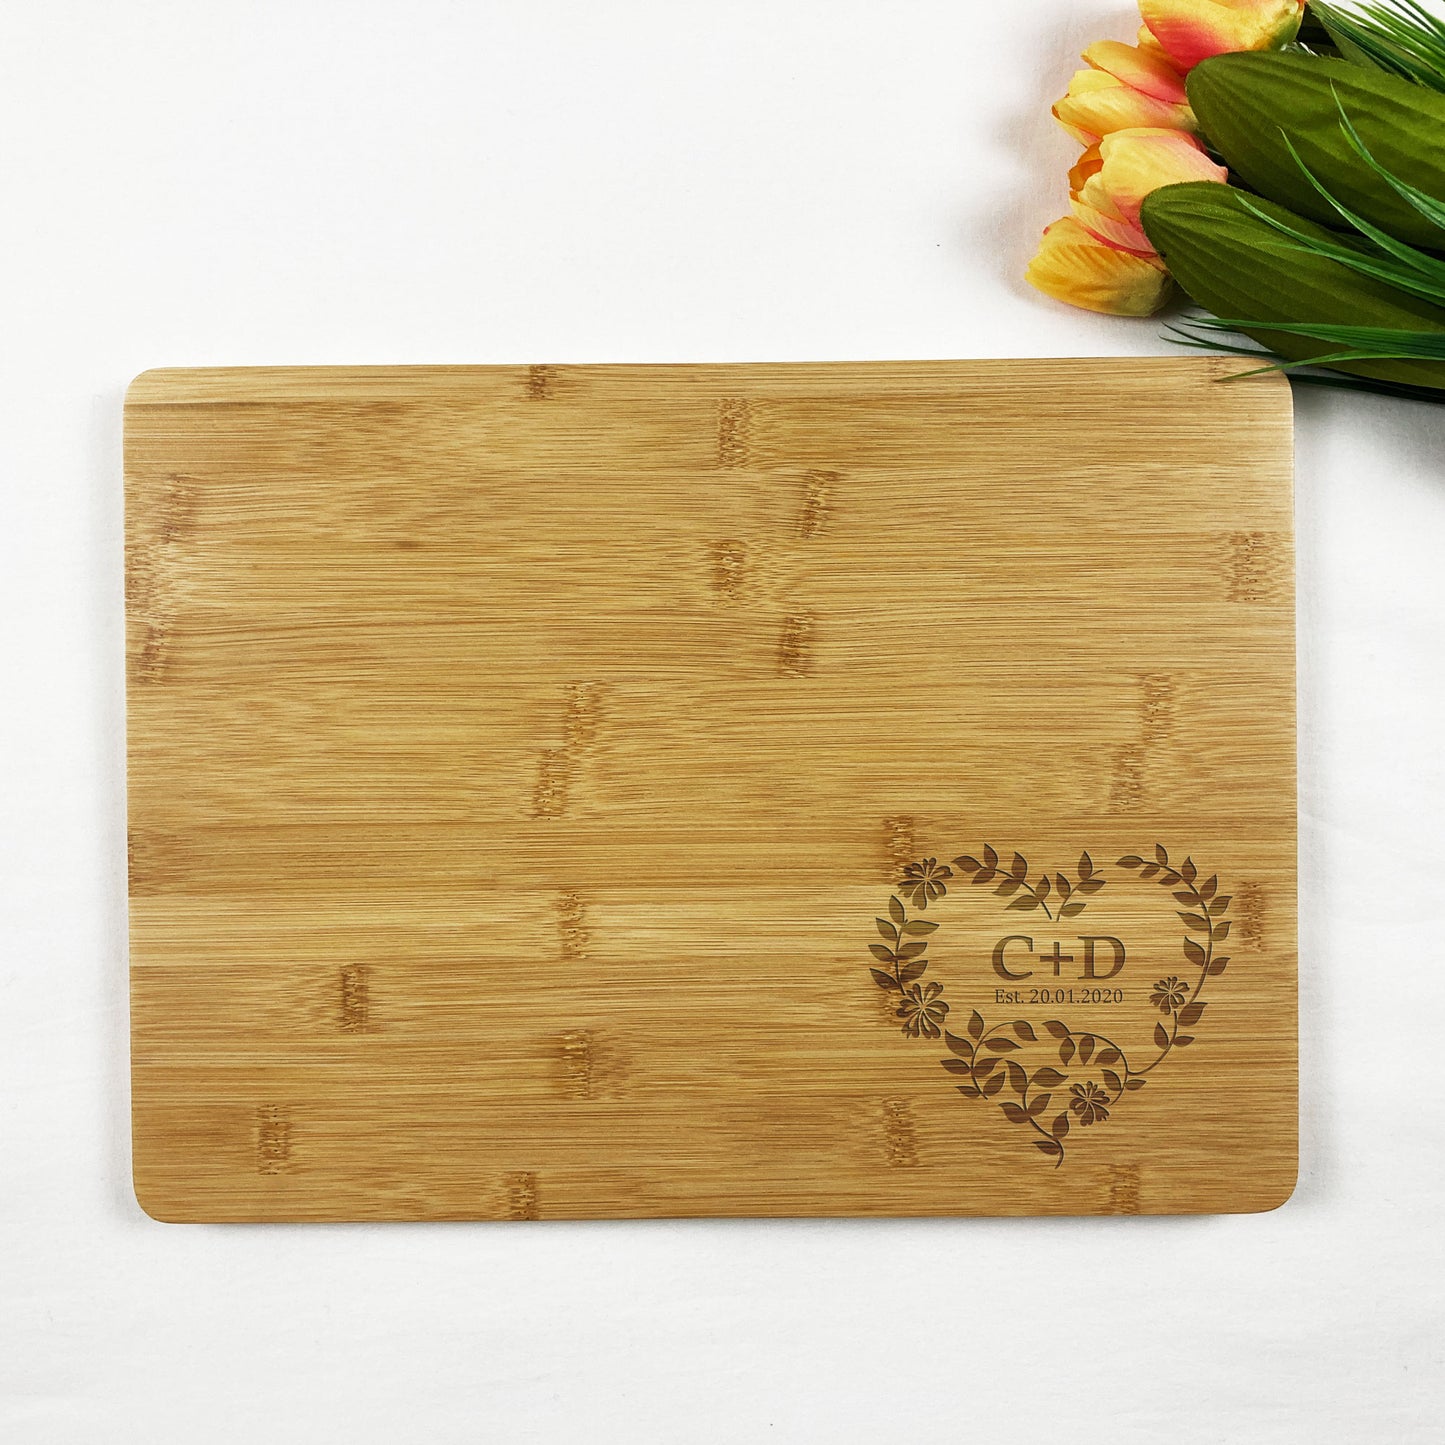 Floral Heart with Initials & Date Chopping Board Gift